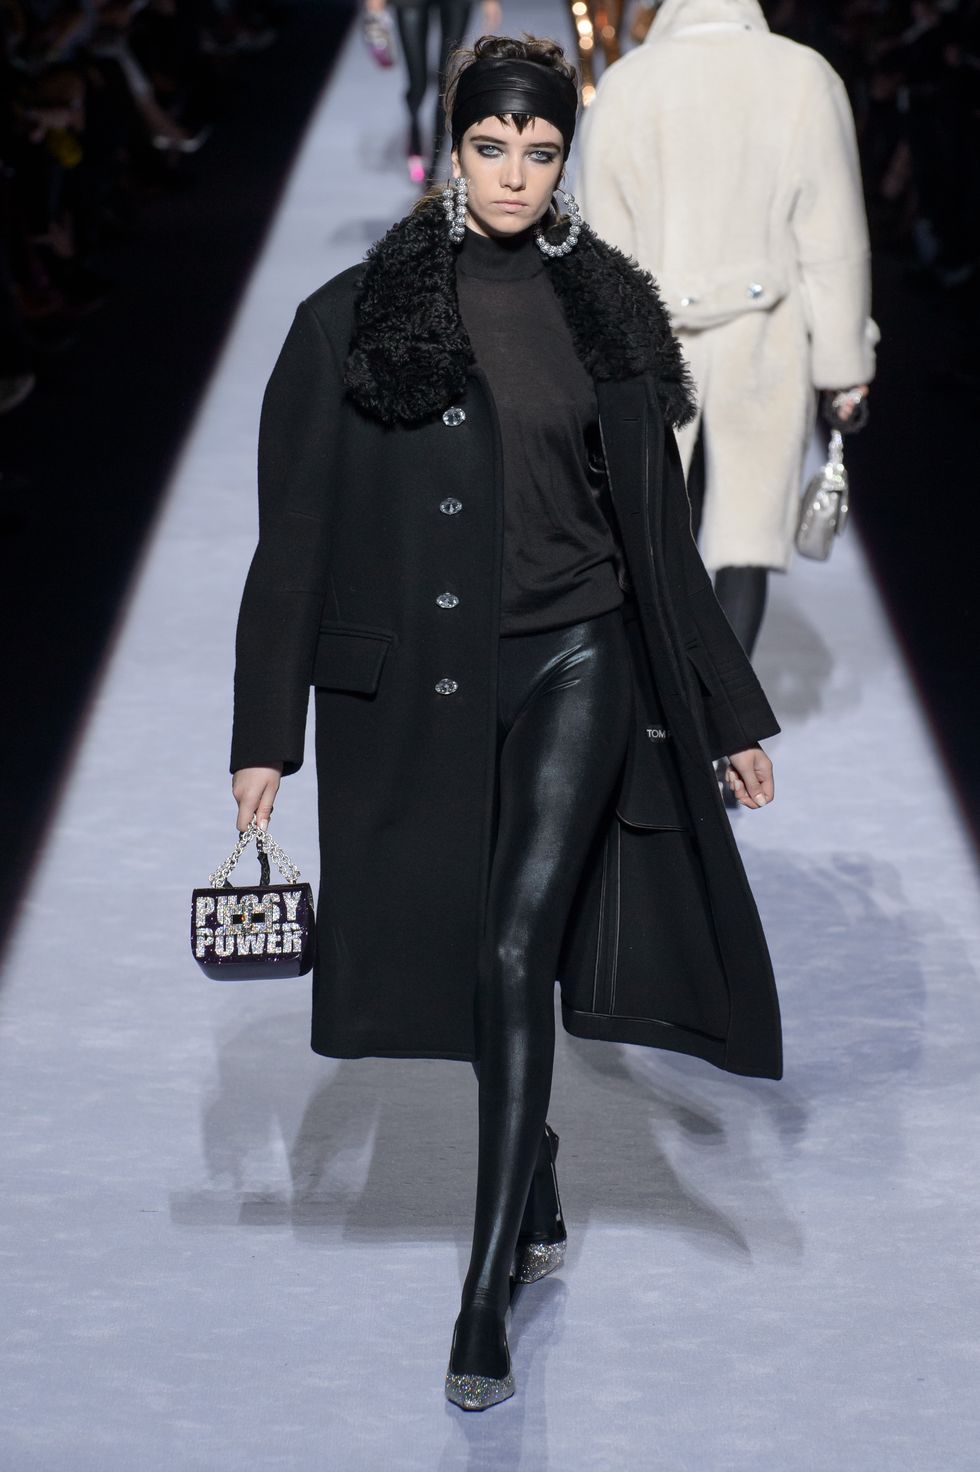 36 Looks From Tom Ford Fall 2018 NYFW Show – Tom Ford Runway at